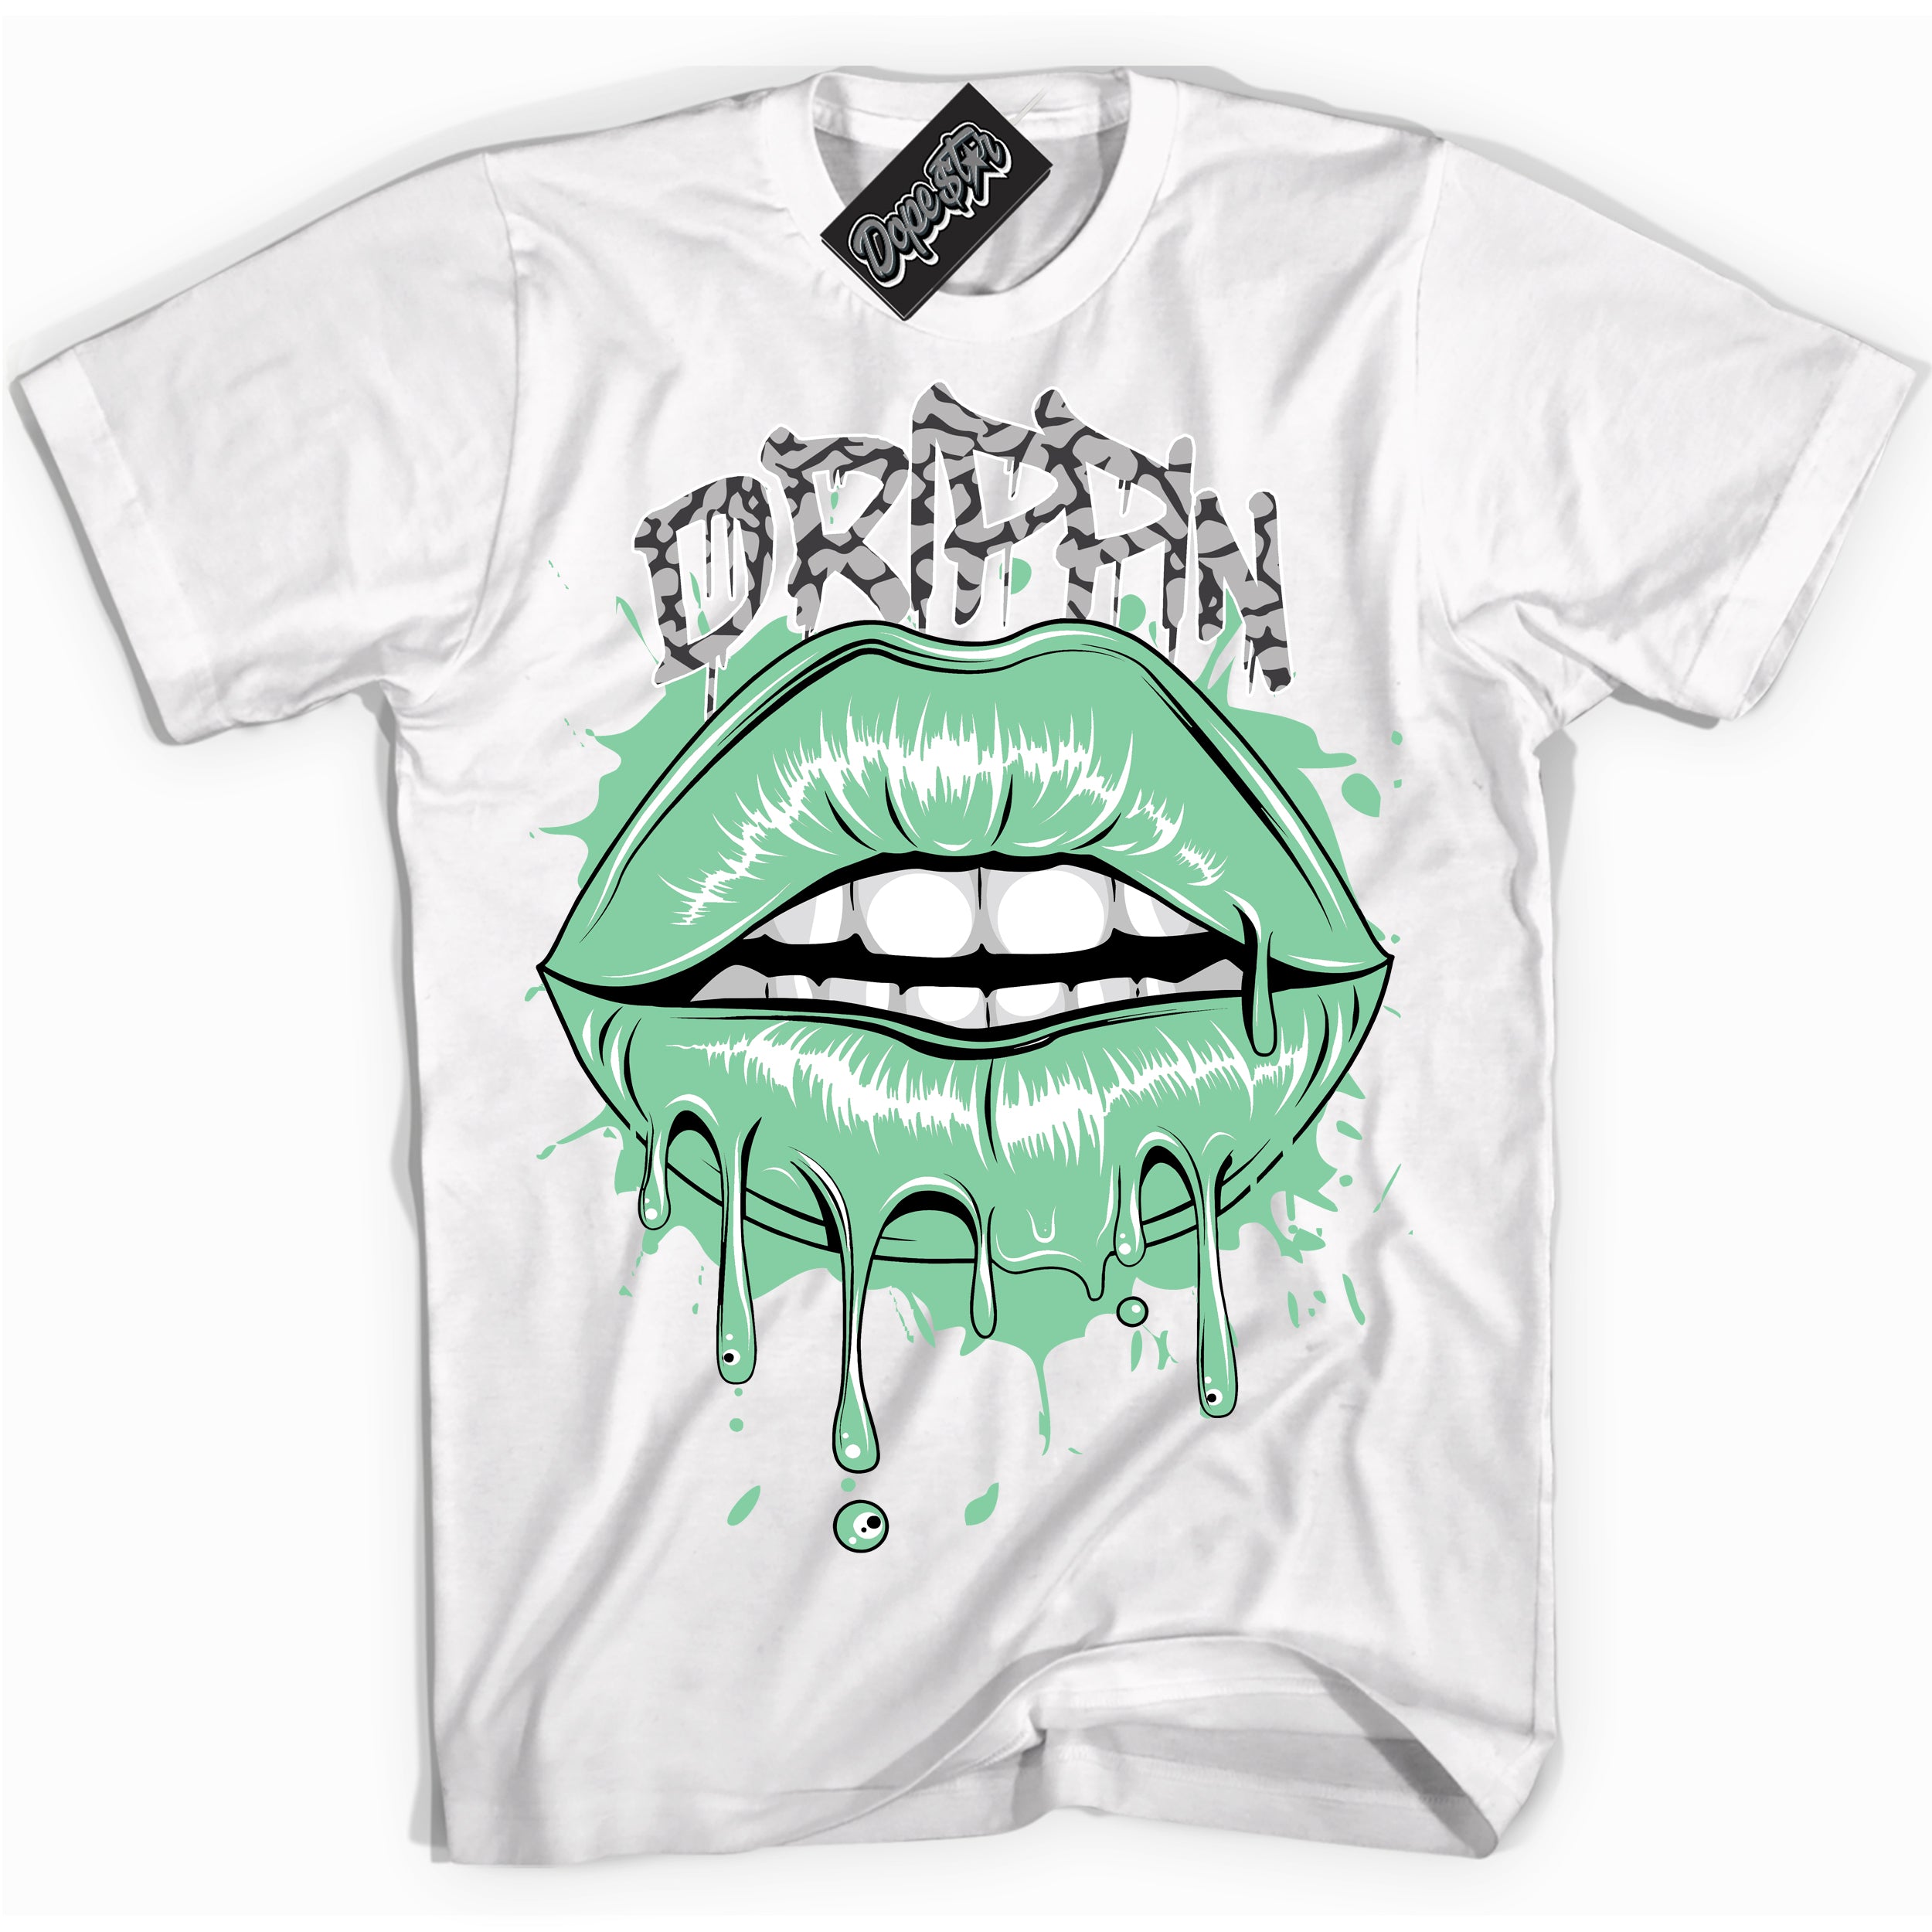 Cool White graphic tee with “ Drippin” design, that perfectly matches Green Glow 3s sneakers 